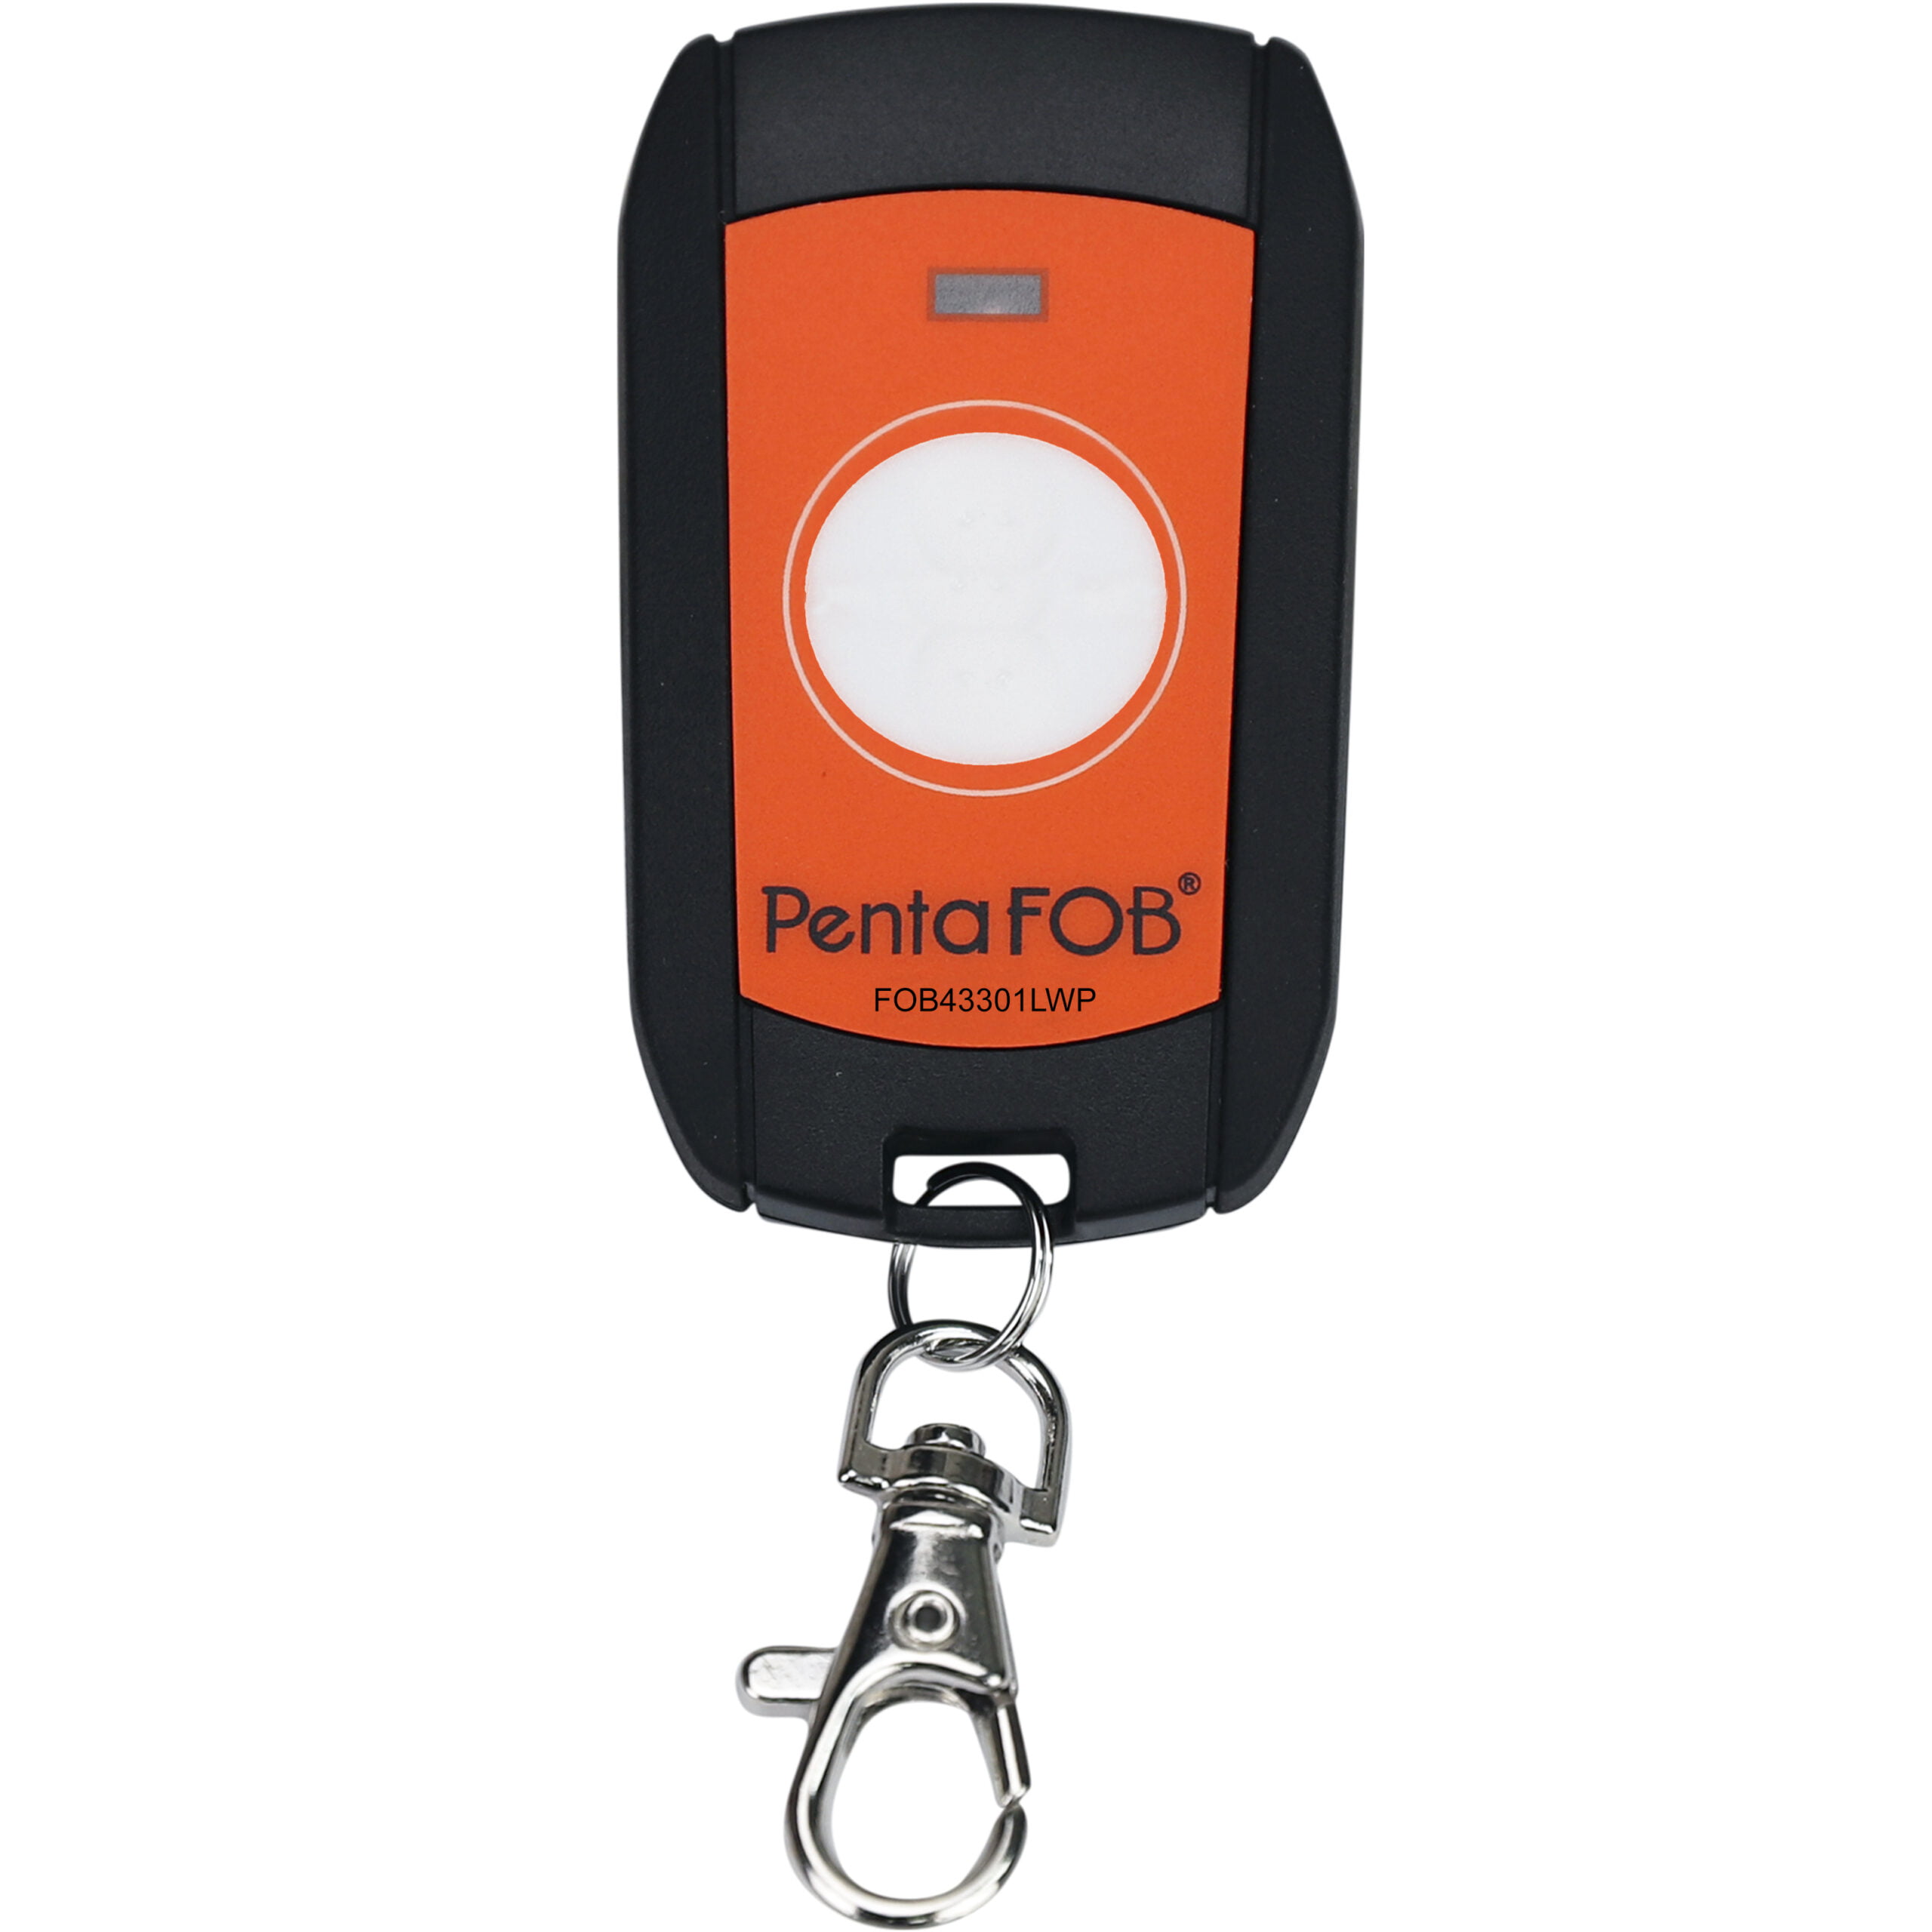 1-CHANNEL KEYRING WATERPROOF PENTAFOB TRANSMITTER LARGE BUTTON WITH 5 FREQUENCIES ORANGE